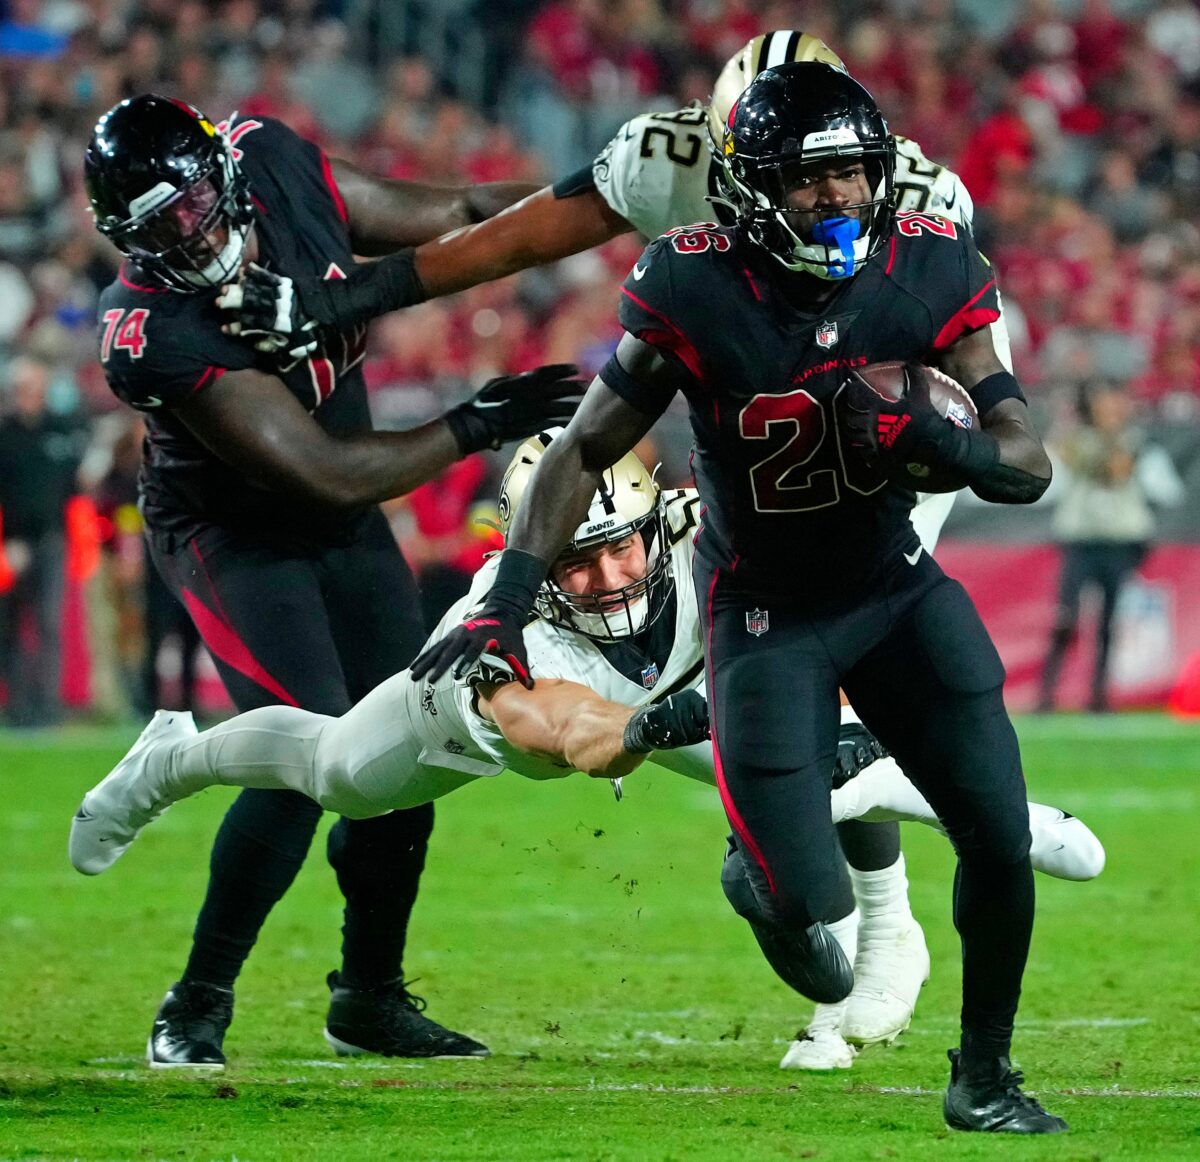 Takeaways from the Cardinals’ 42-34 win over the Saints